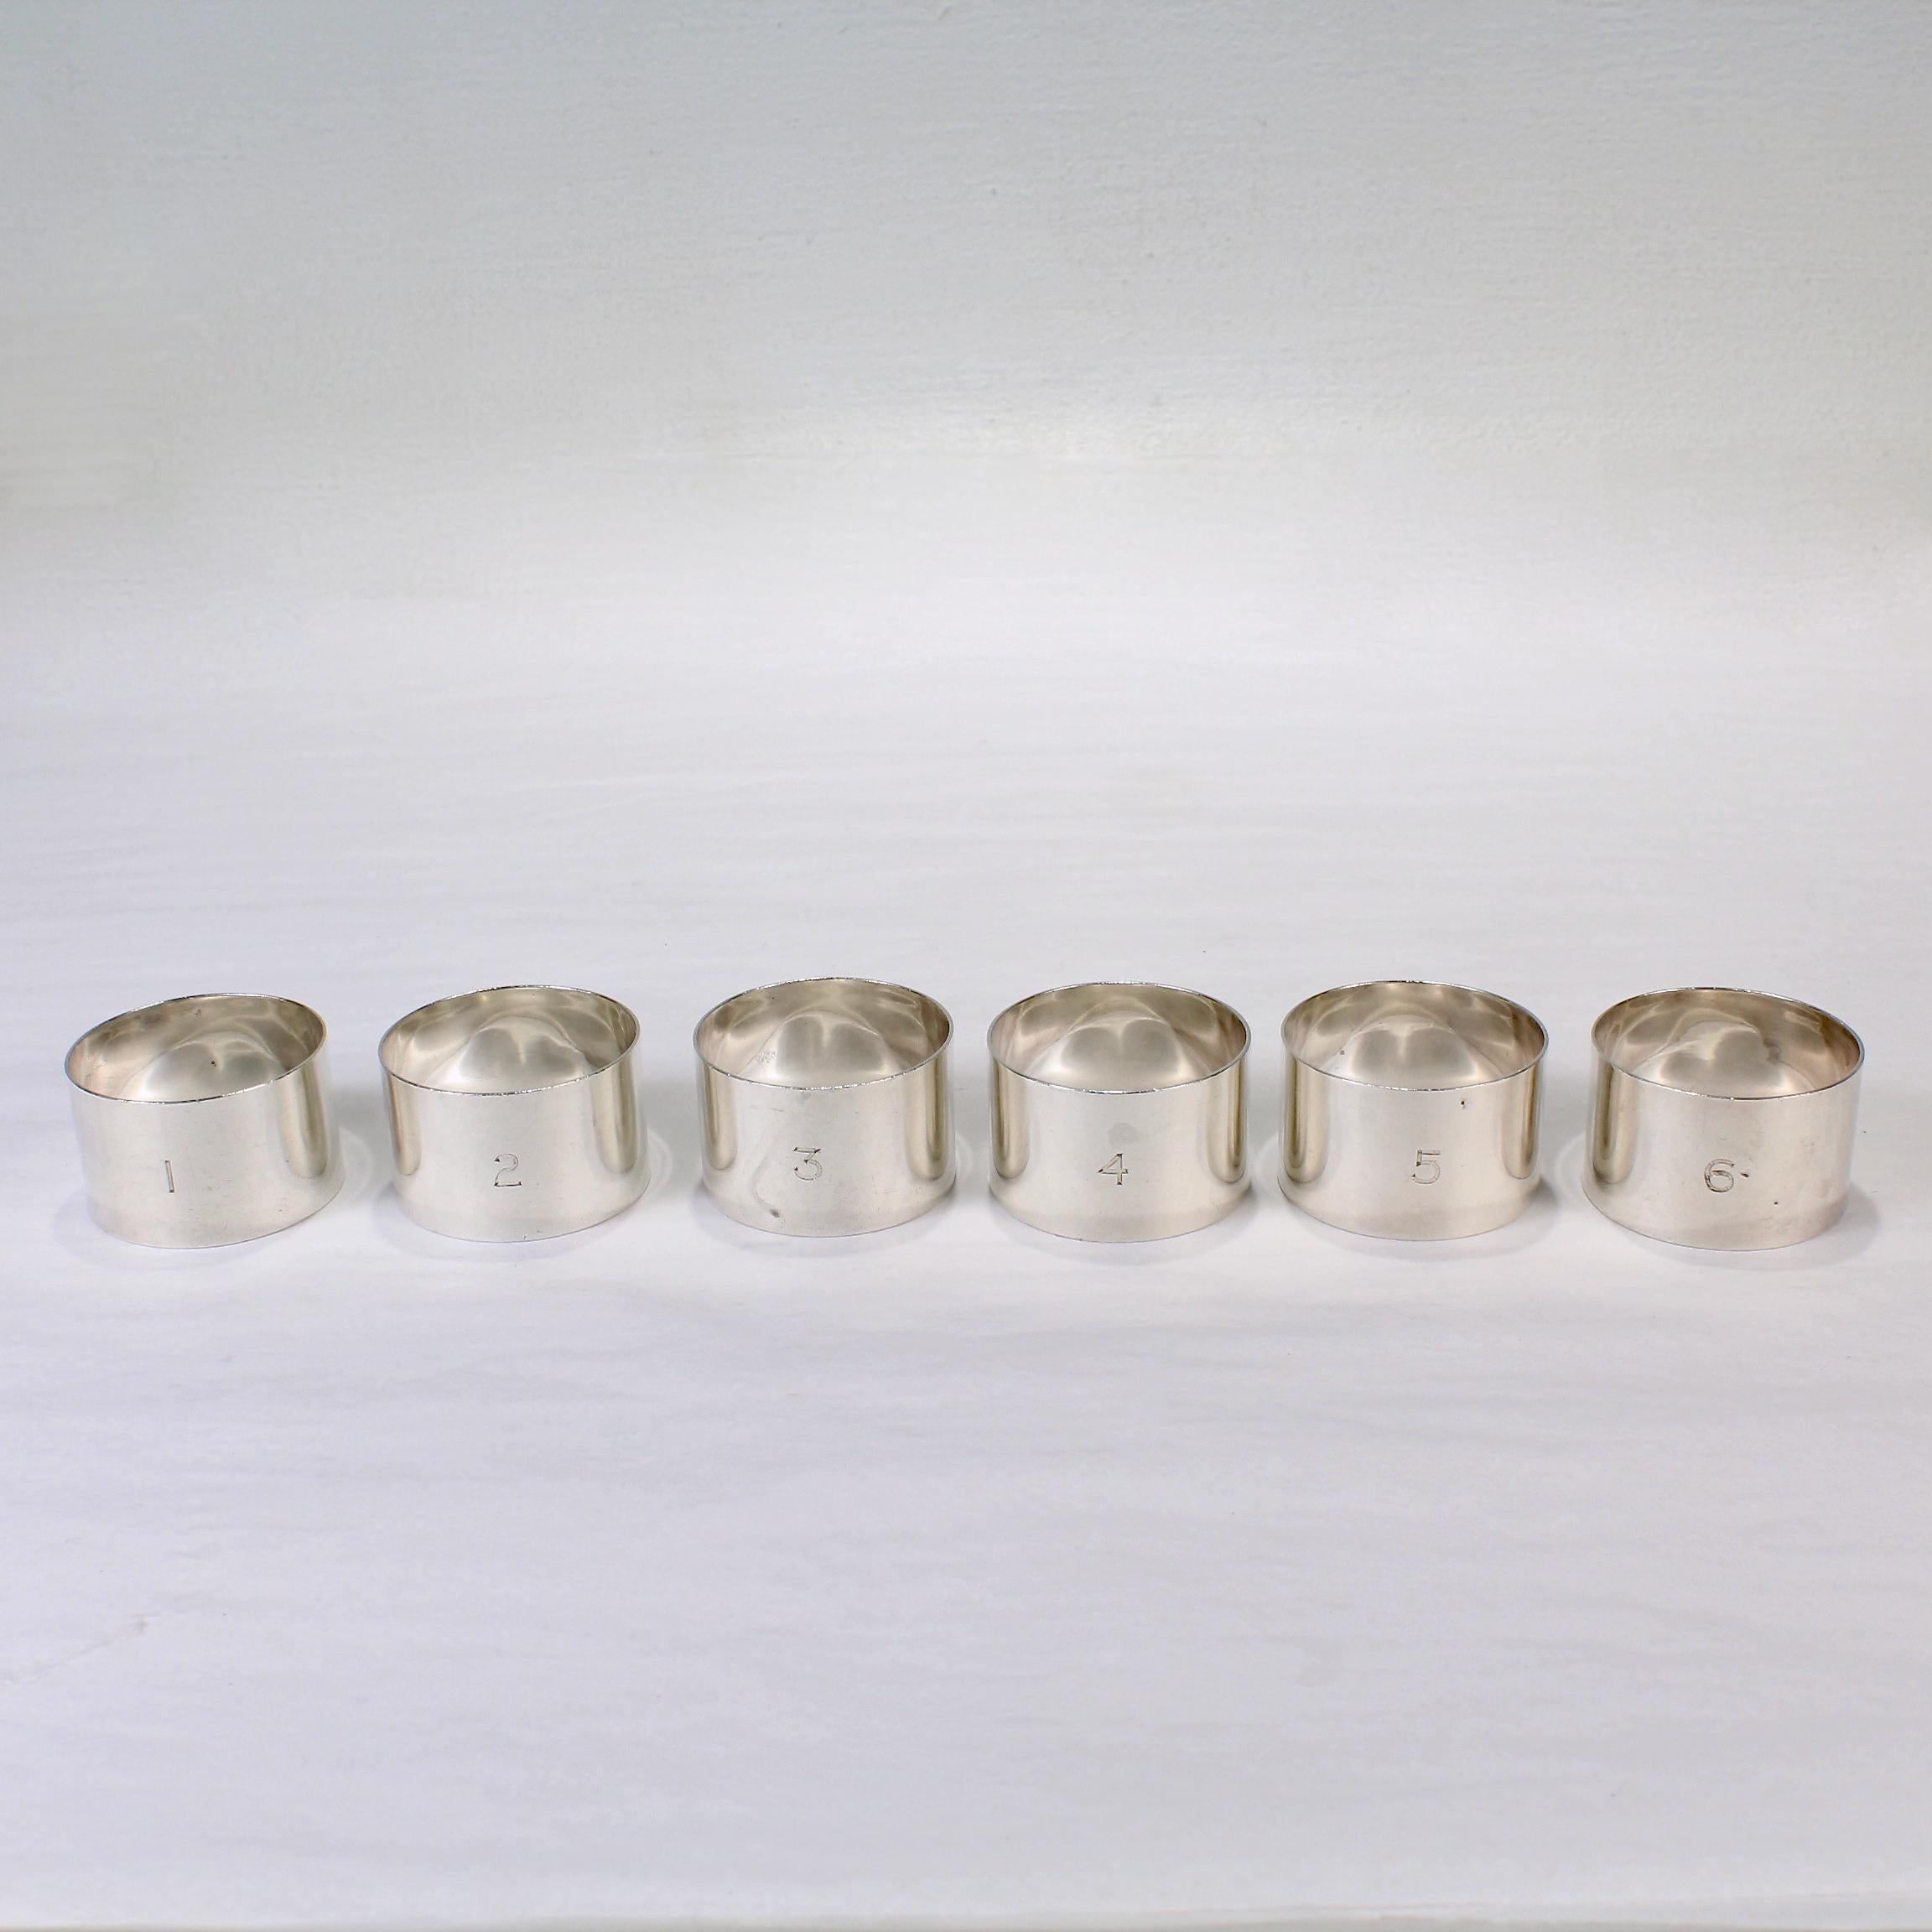 A fine numbered set of 6 Edwardian sterling silver napkin rings. 

By the Adie Brothers of Birmingham, England.

Each napkin ring has an engraved number 1 through 6.

Simply a great set of English napkin rings!

Date:
1913

Overall Condition:
They